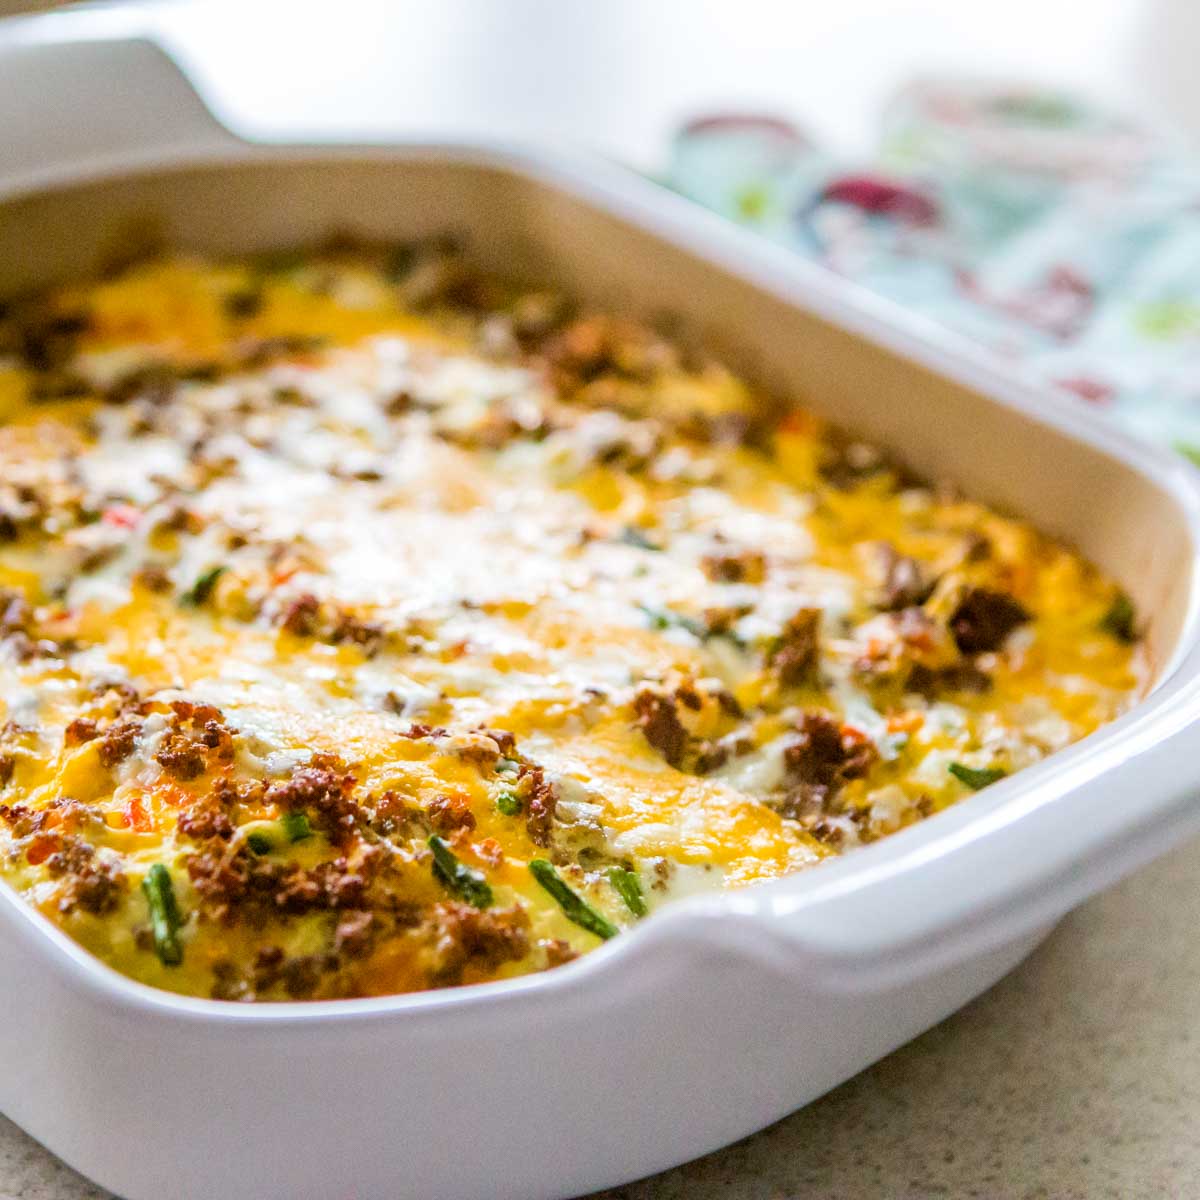 A white baking dish has a cheesy sausage and egg casserole with green veggies mixed in.